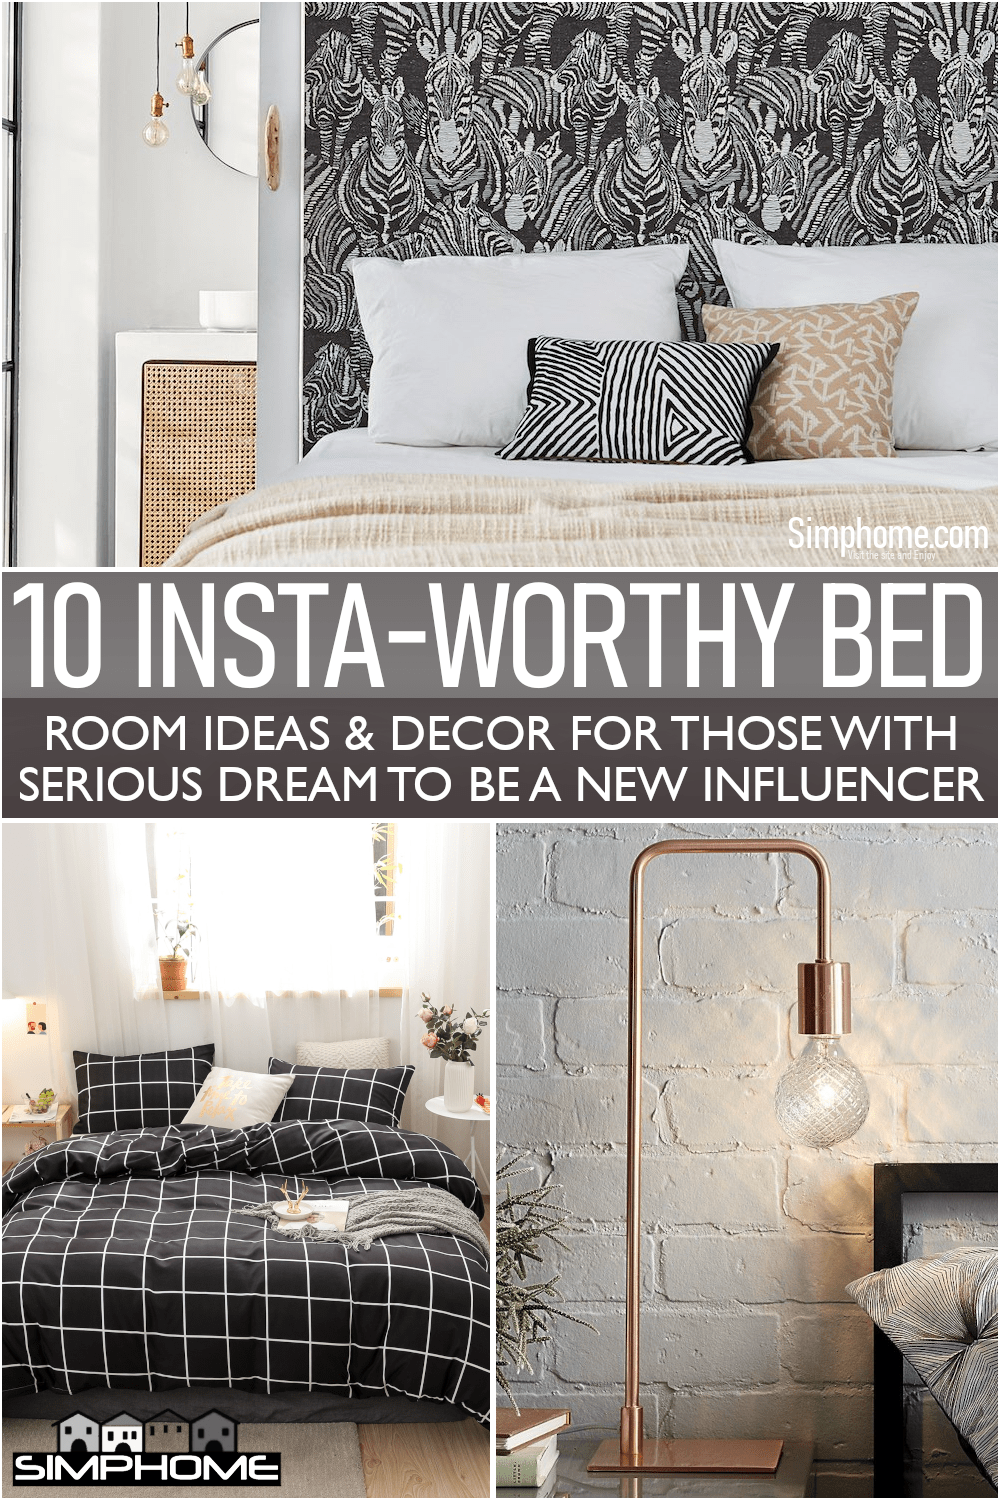 This Insta-Worthy Bedroom Decor Ideas via Simphome.com is awesome